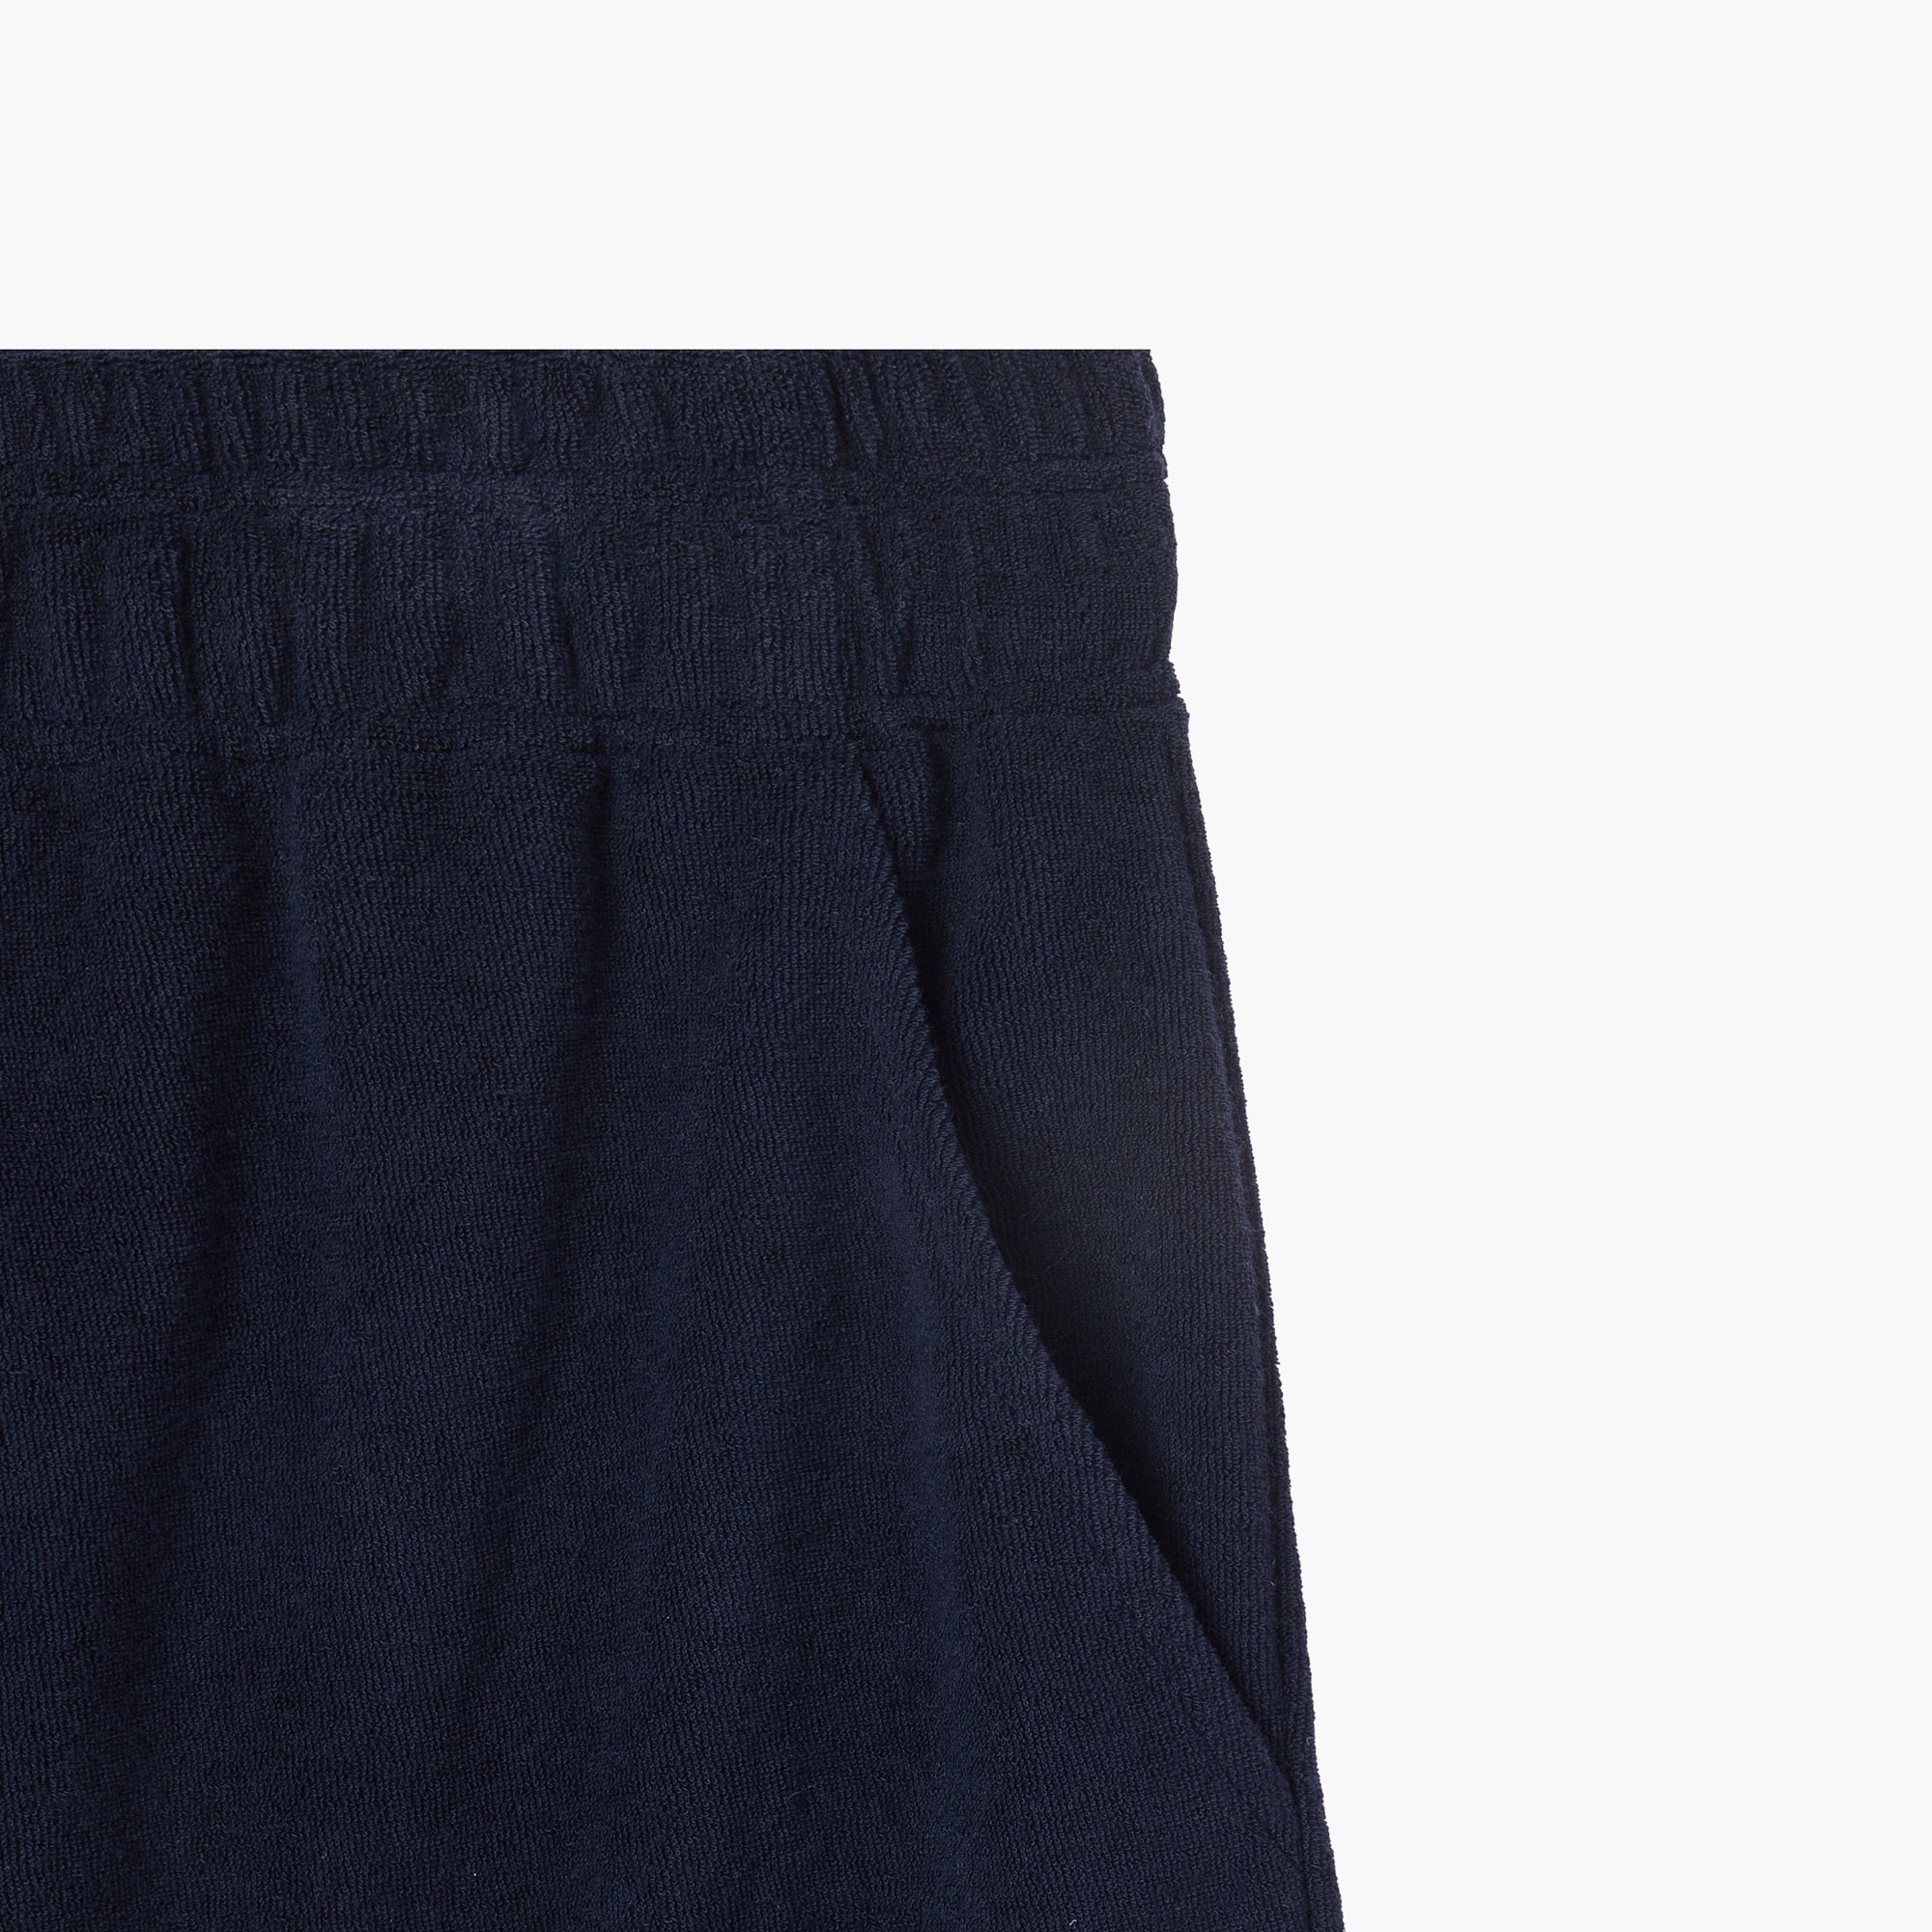 (MEN) PERFECT PLAYER EMBROIDERED TERRY SHORTS, NAVY